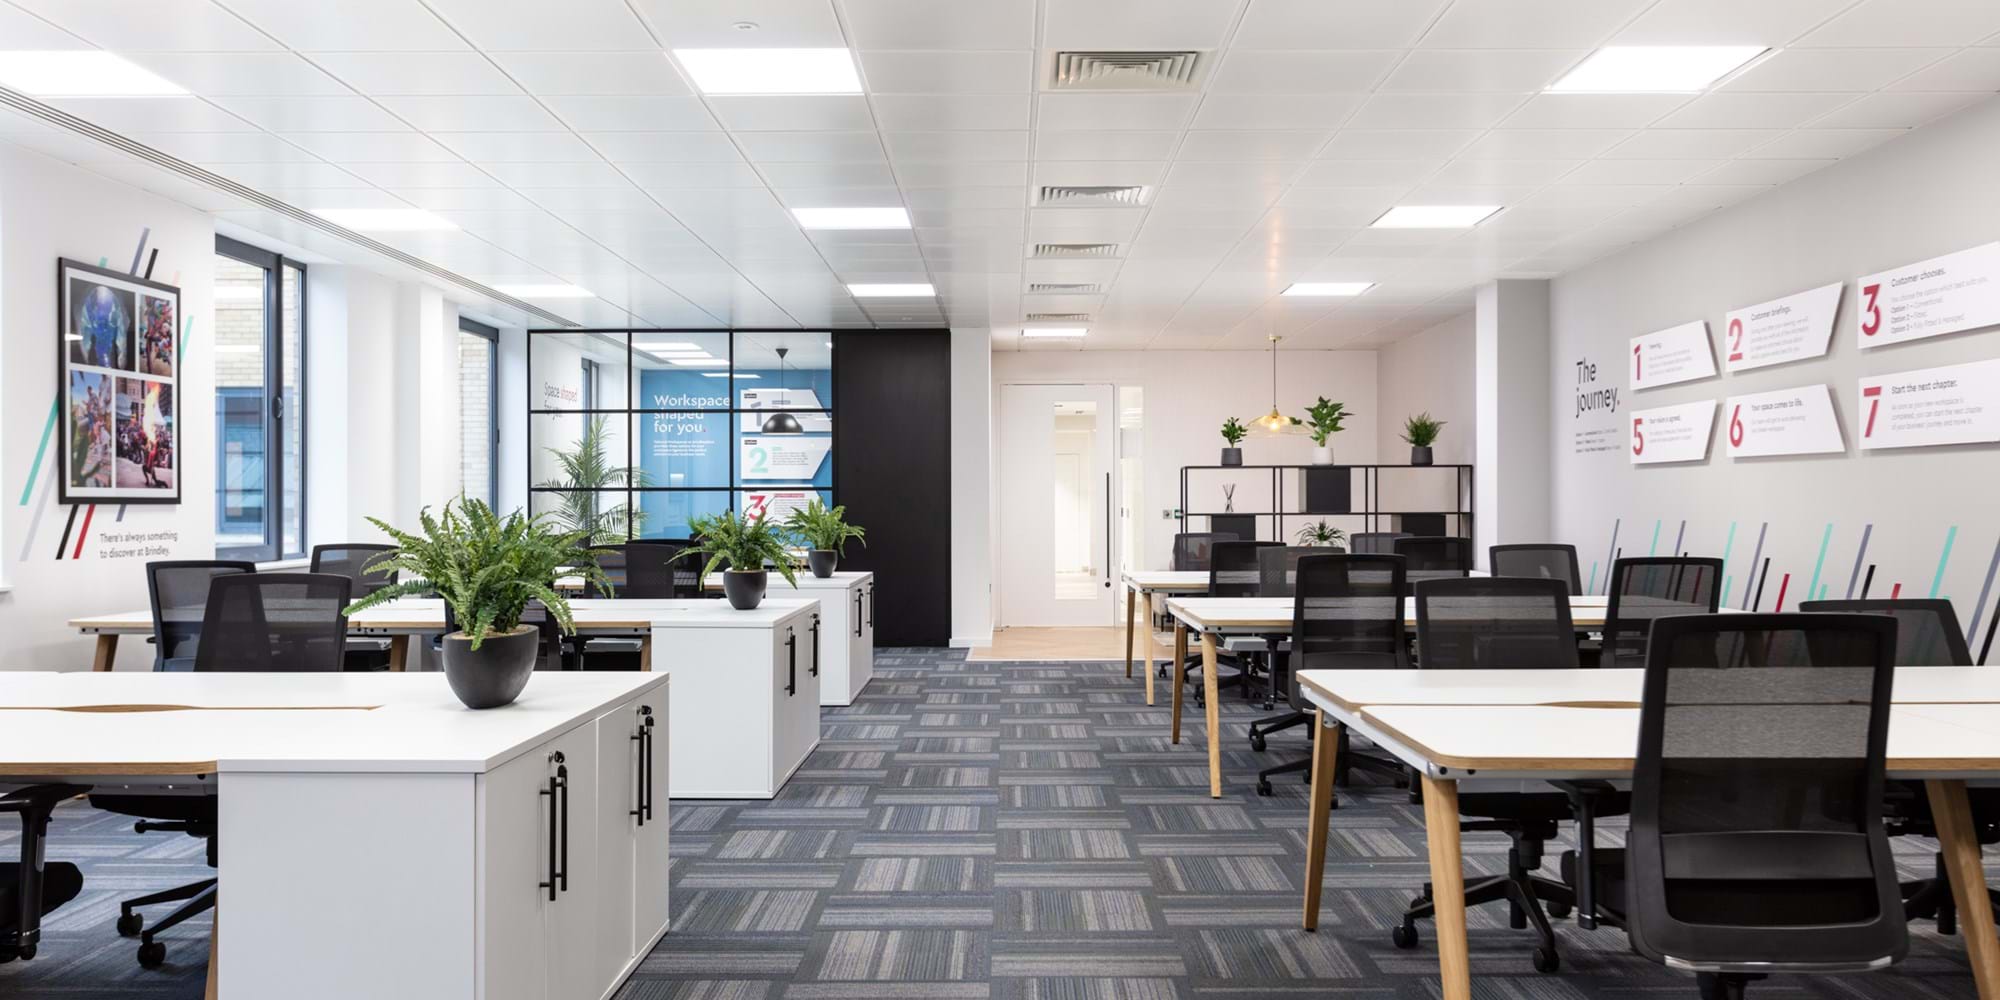 Modus Workspace office design, fit out and refurbishment - Pivot - Brindley Place - Pivot_9_BrindleyPlace-13.jpg